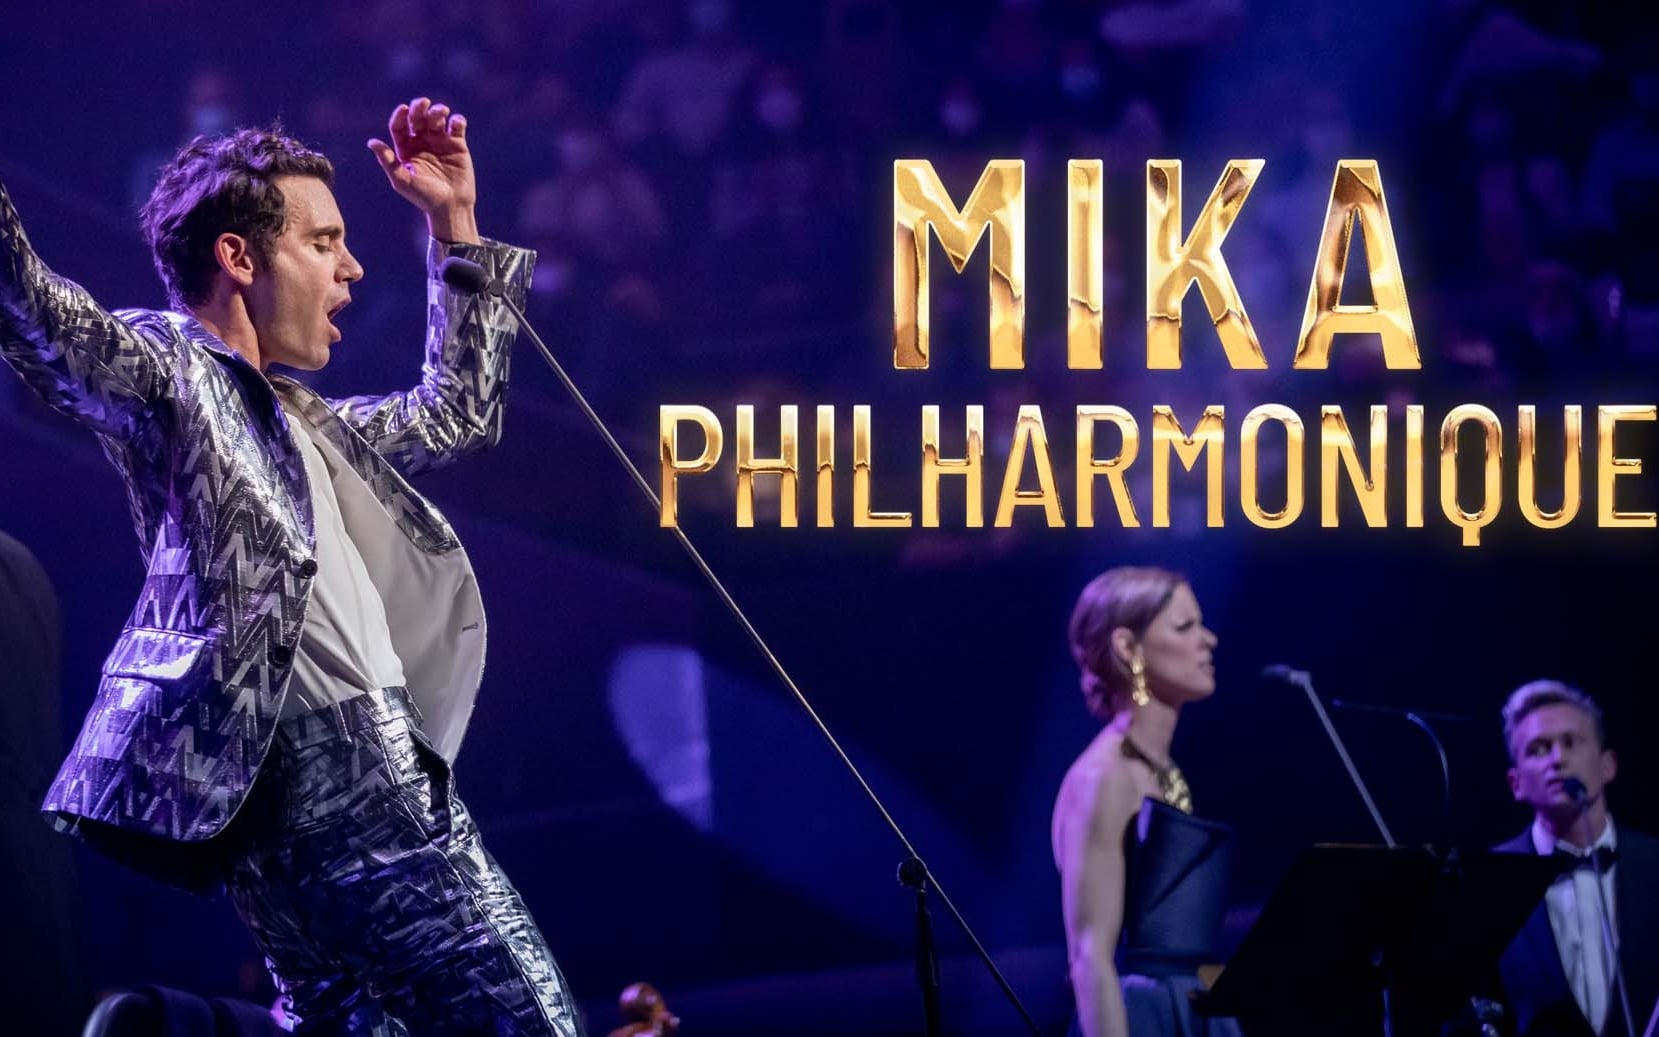 Christmas with Mika, the concert at the Philharmonique is on Sky Uno